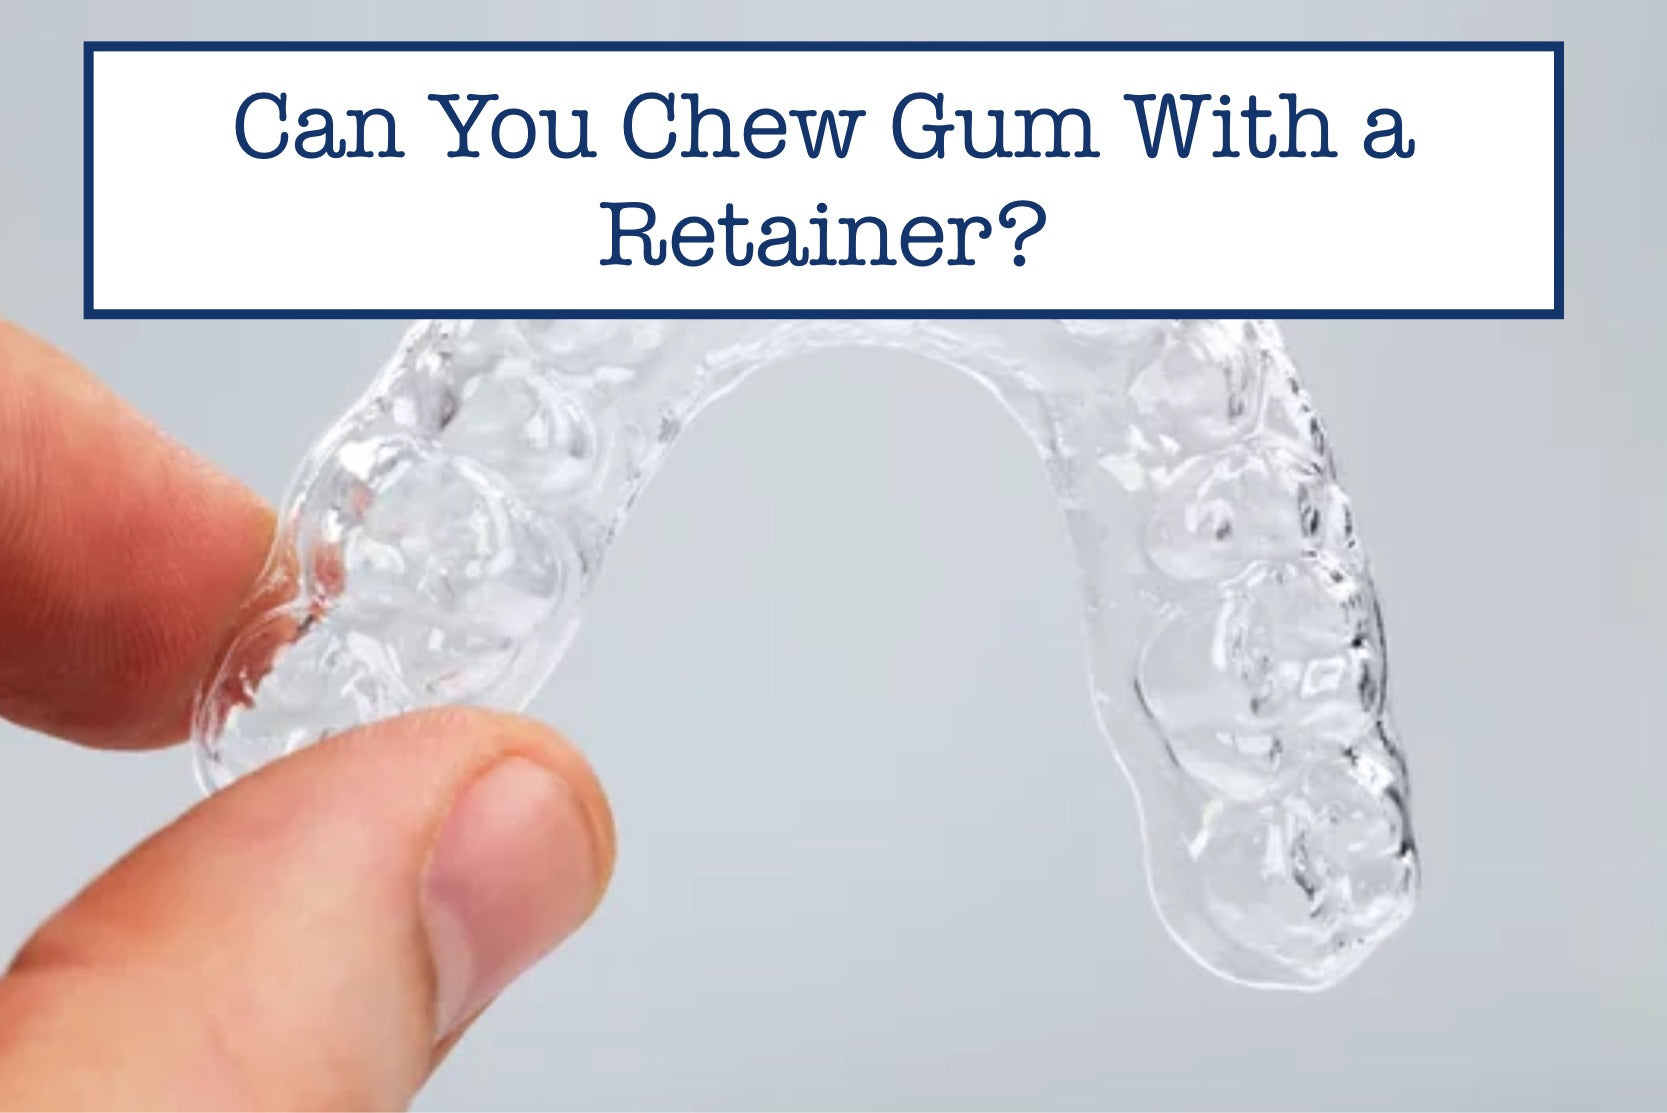 Can You Chew Gum With a Retainer?